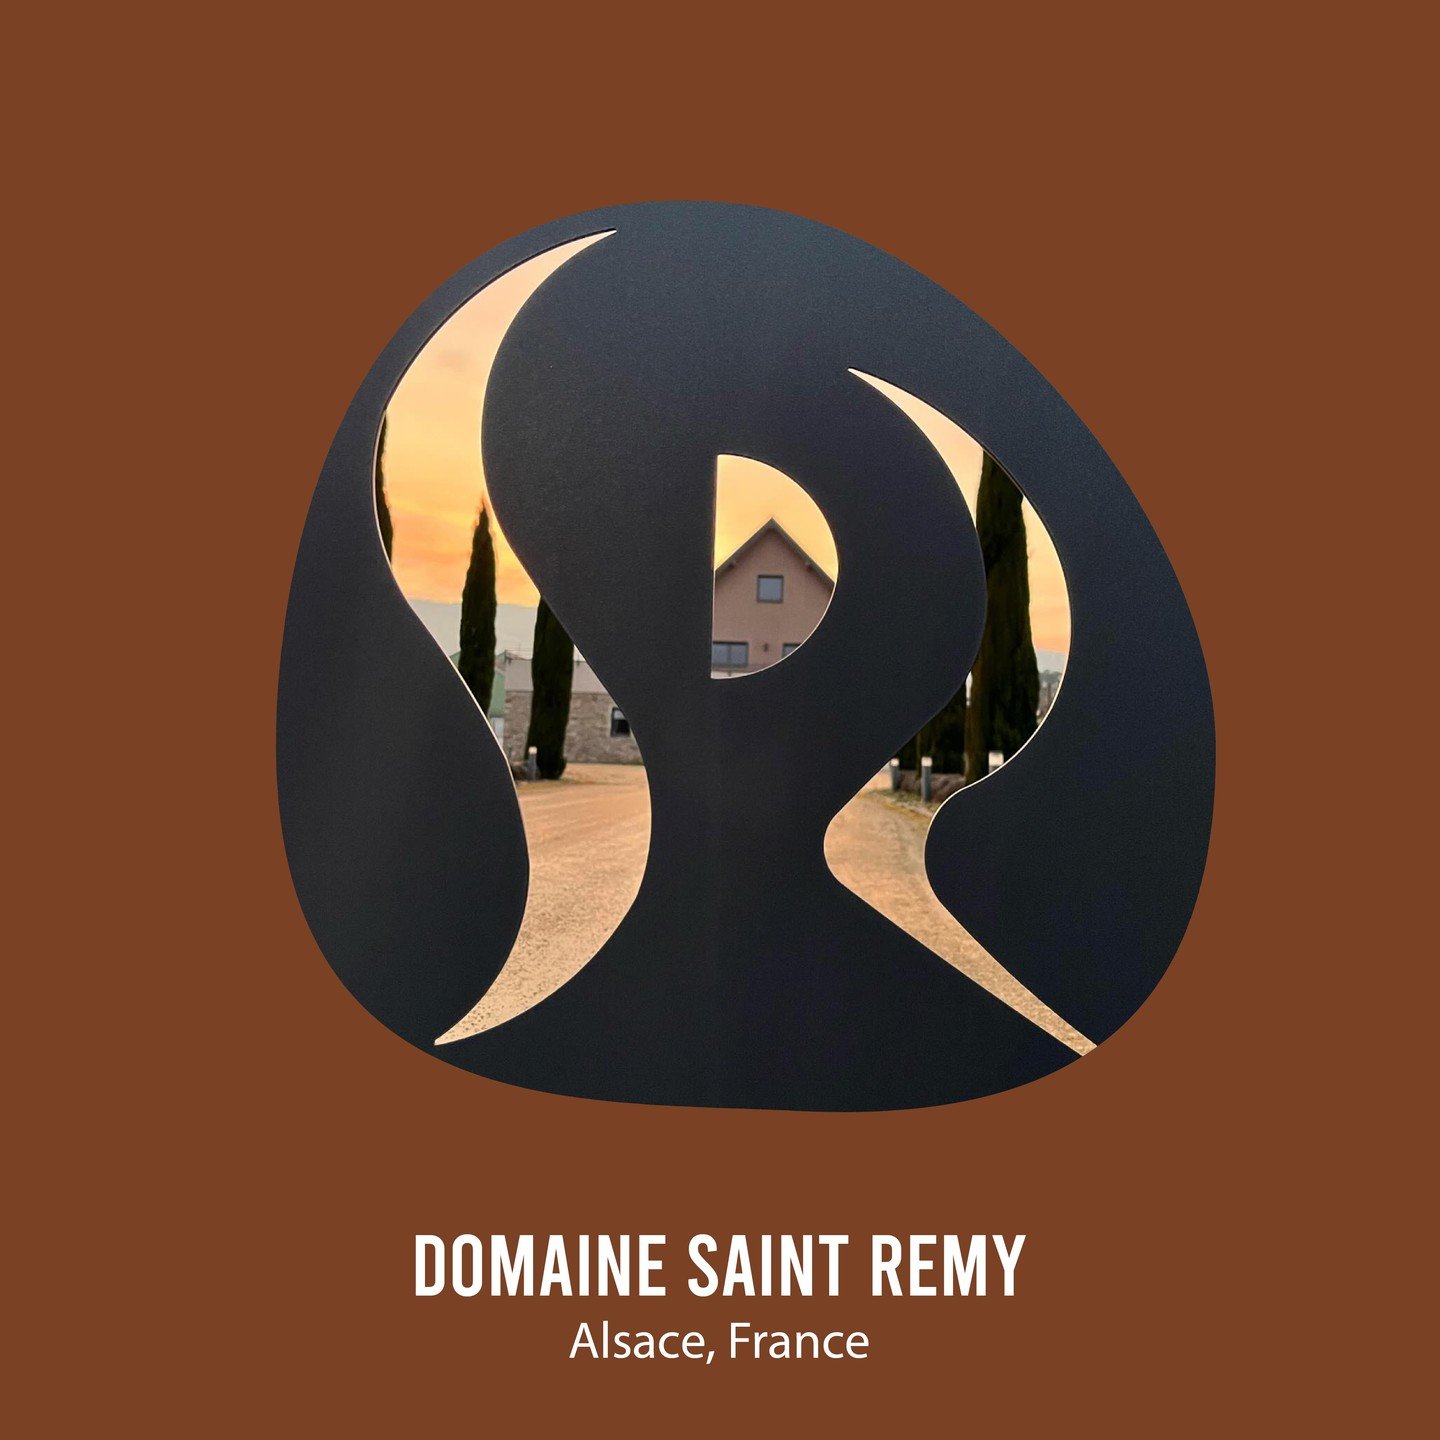 Biodynamic farming is a holistic approach to agriculture that emphasizes thei nterconnectedness of soil, plants, and animals within a farm ecosystem.
Discover the extraordinary wines from the Biodynamic certified Domaine Saint Remy.
#alsacewine #eart